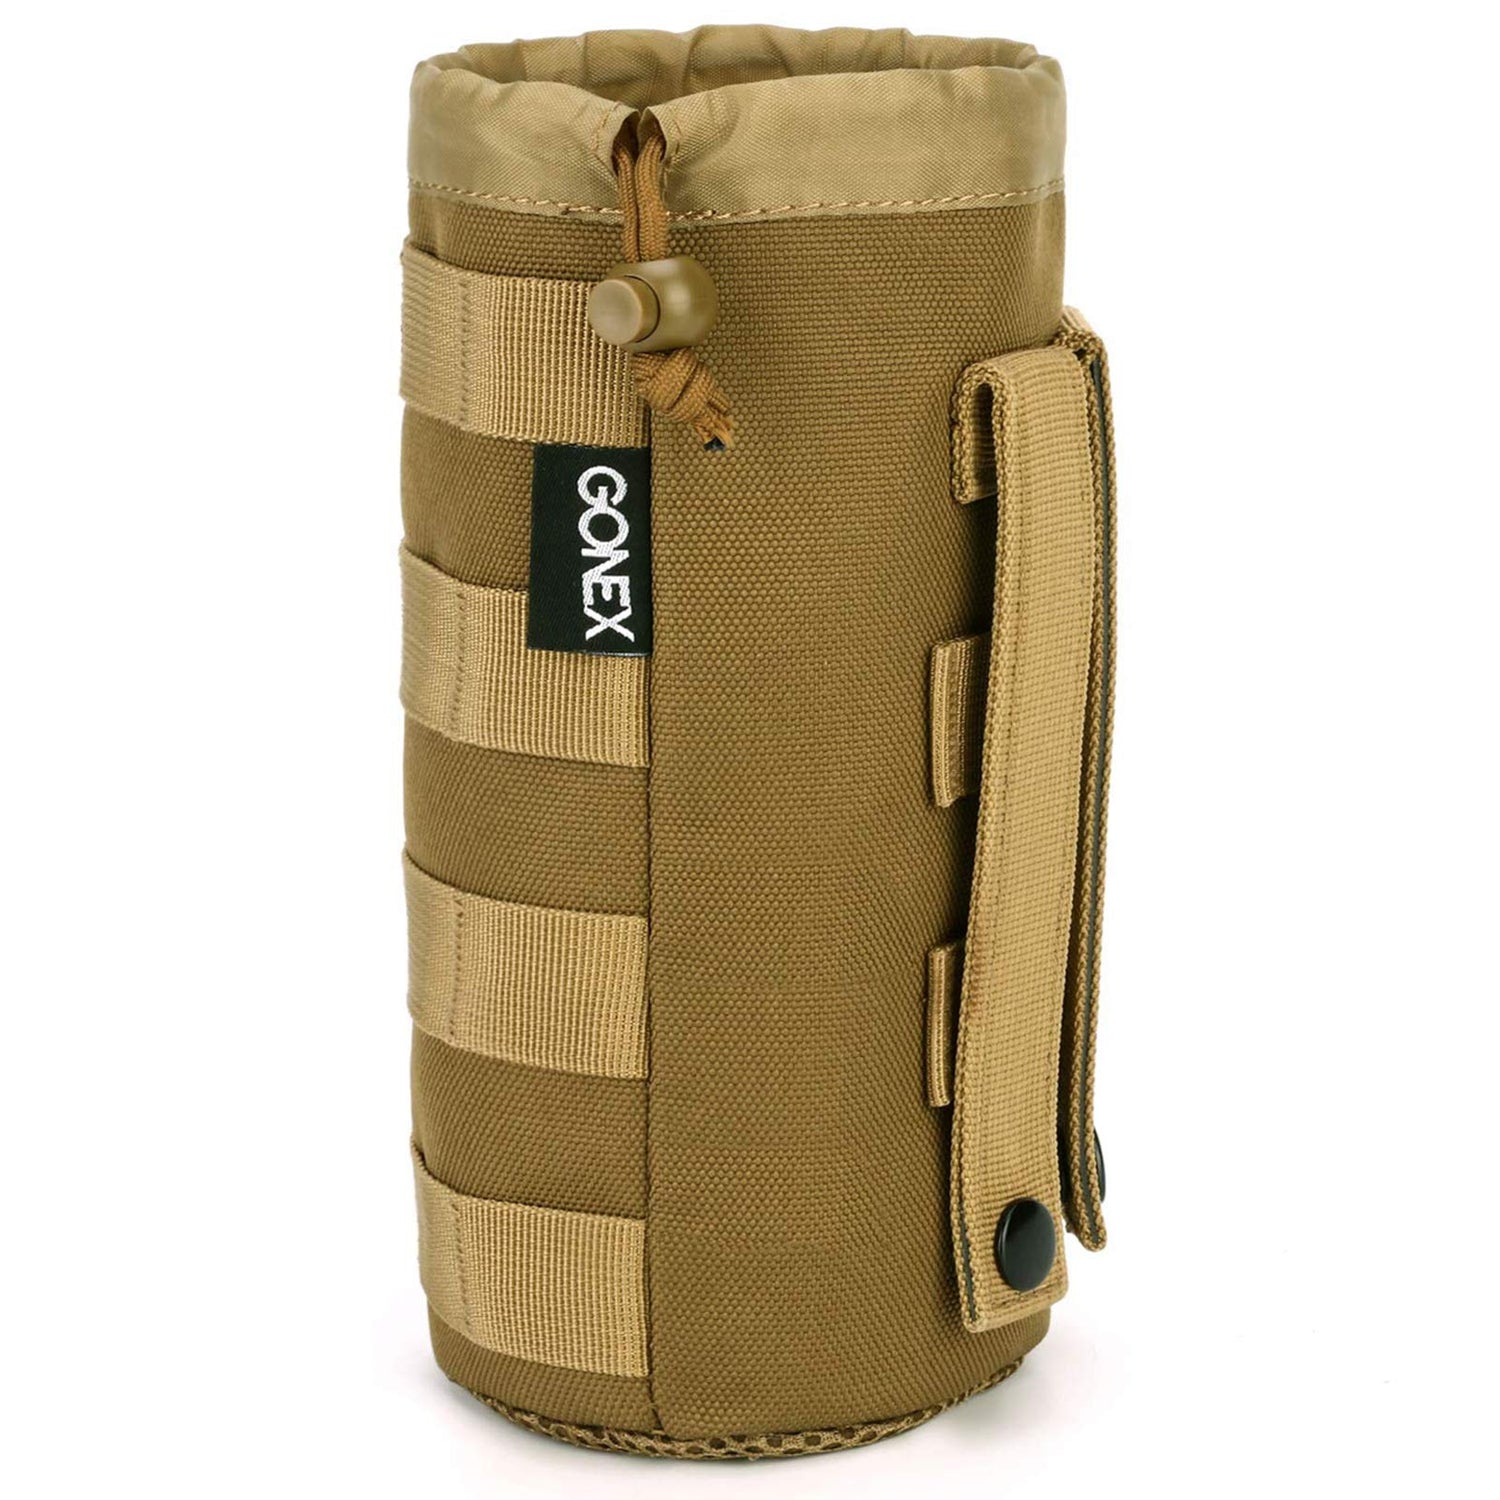 Gonex Tactical Military MOLLE Water Bottle Pouch